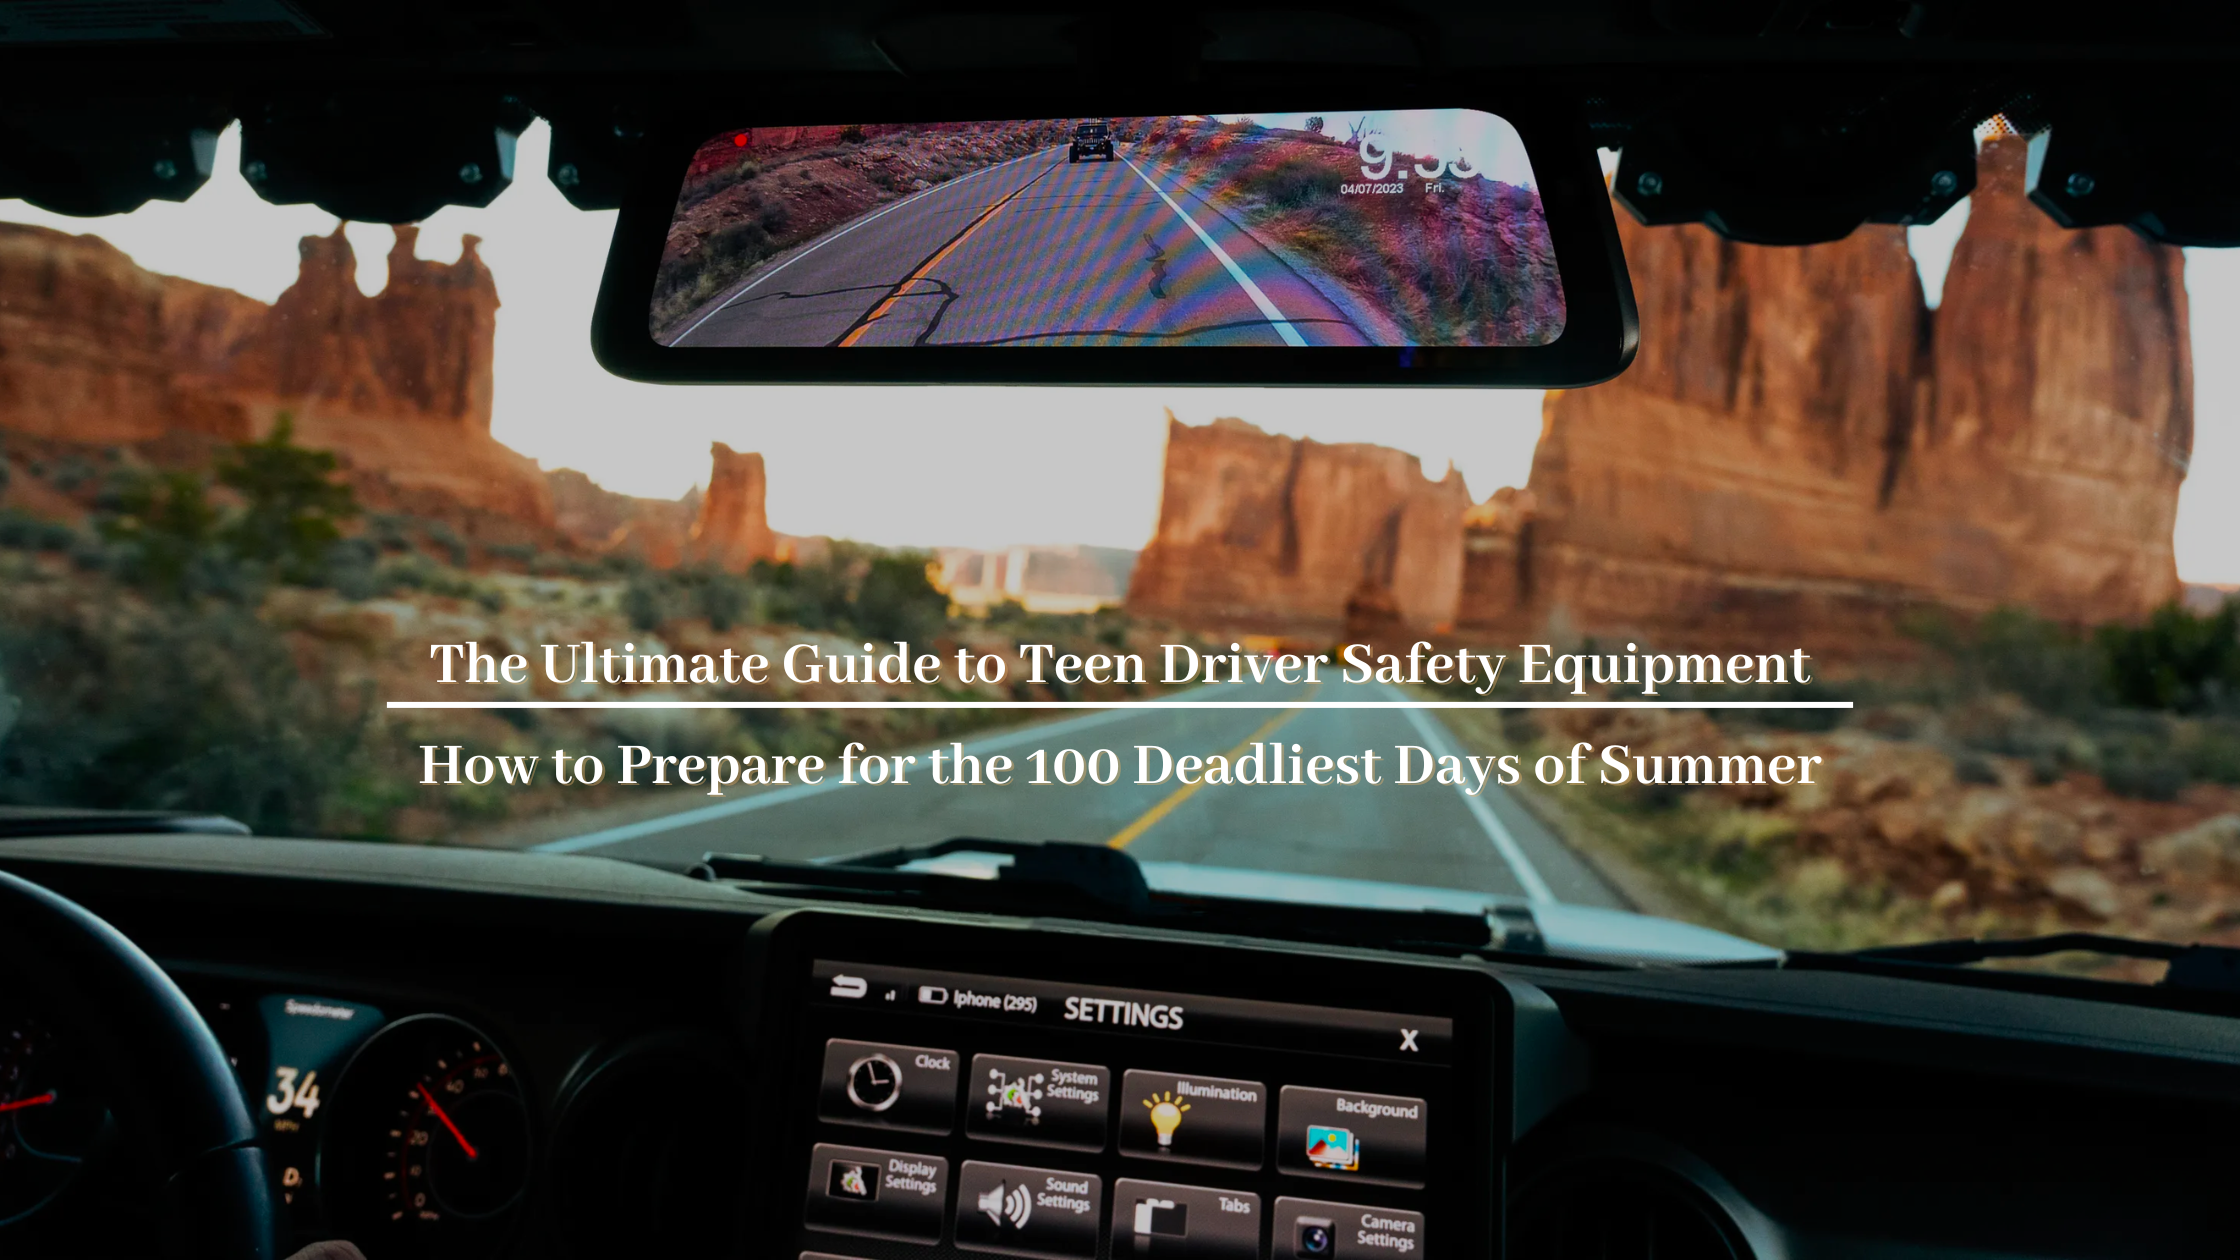 The Ultimate Guide to Teen Driver Safety Equipment